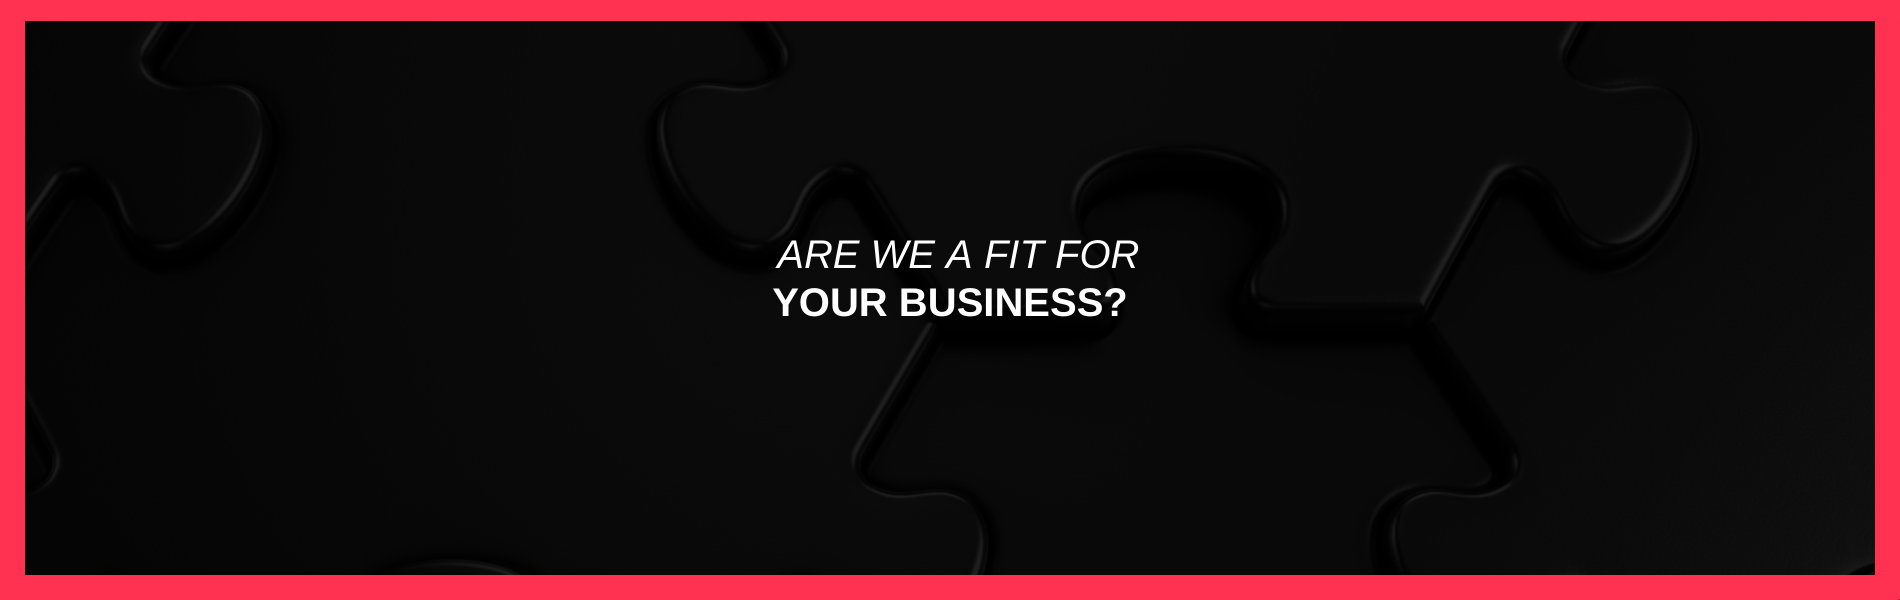 Are We a Fit for Your Business?